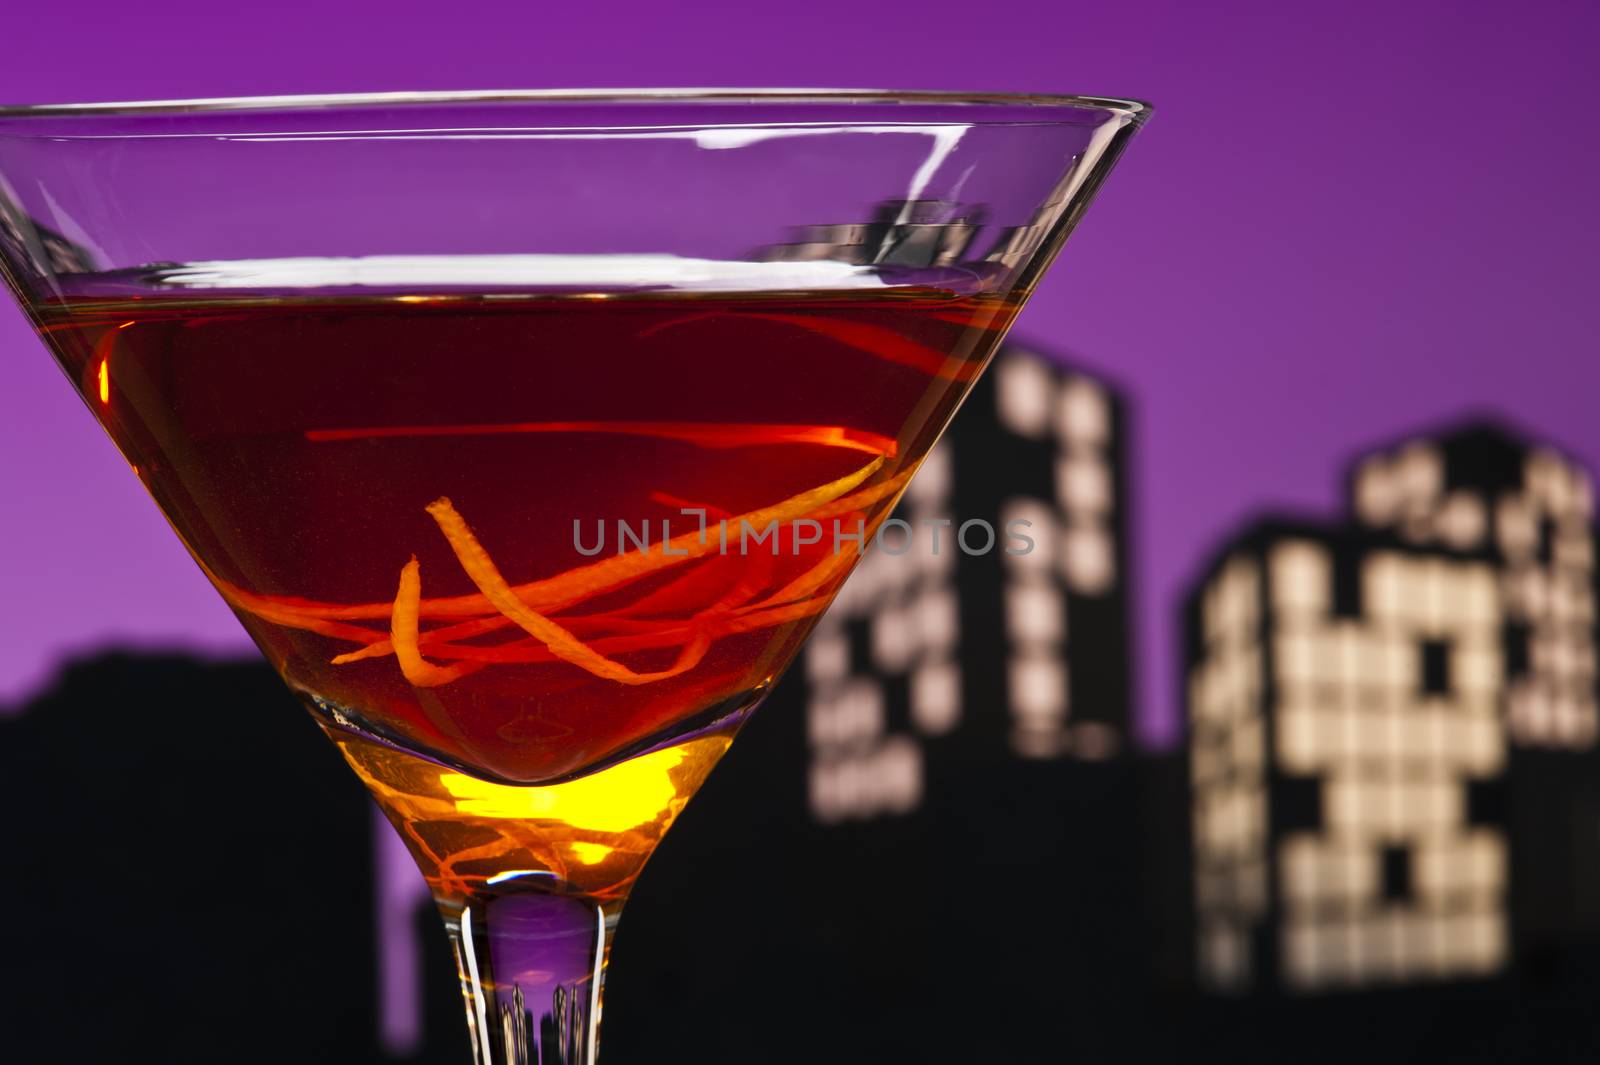 A Manhattan is a cocktail made with whiskey, sweet vermouth, and bitters. Whiskeys used are rye (the traditional choice), Canadian whisky, bourbon, blended whiskey and Tennessee whiskey.